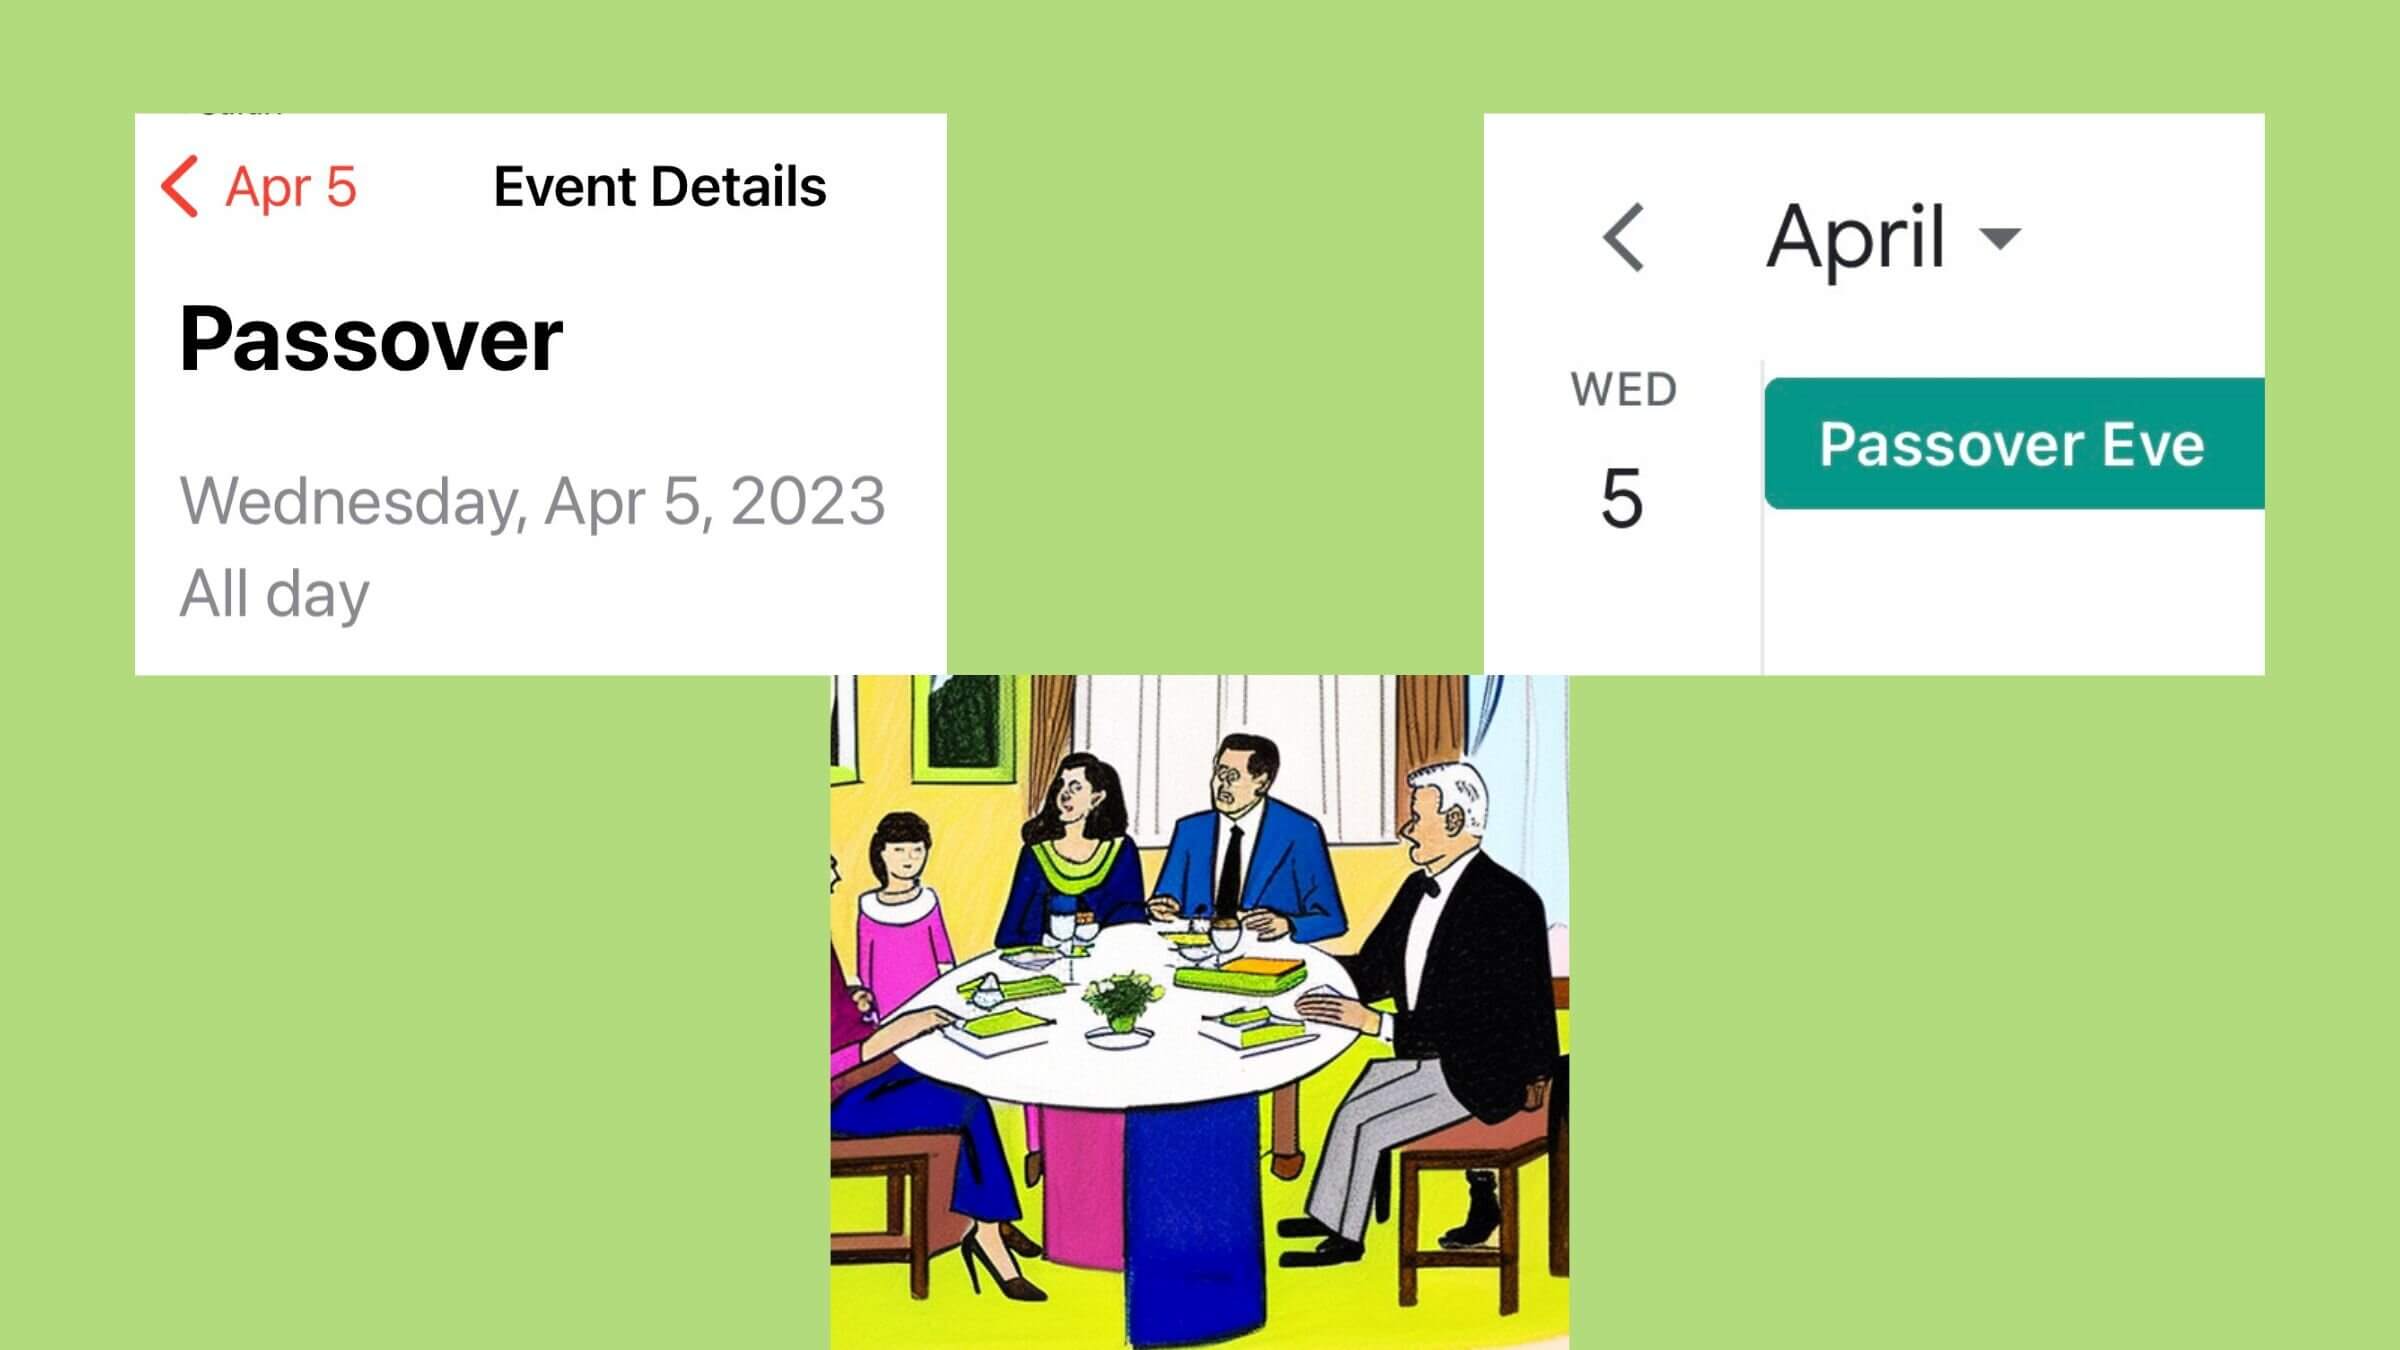 Online calendars are inconsistent in how they display the first night of Passover, which falls on April 5, 2023. 